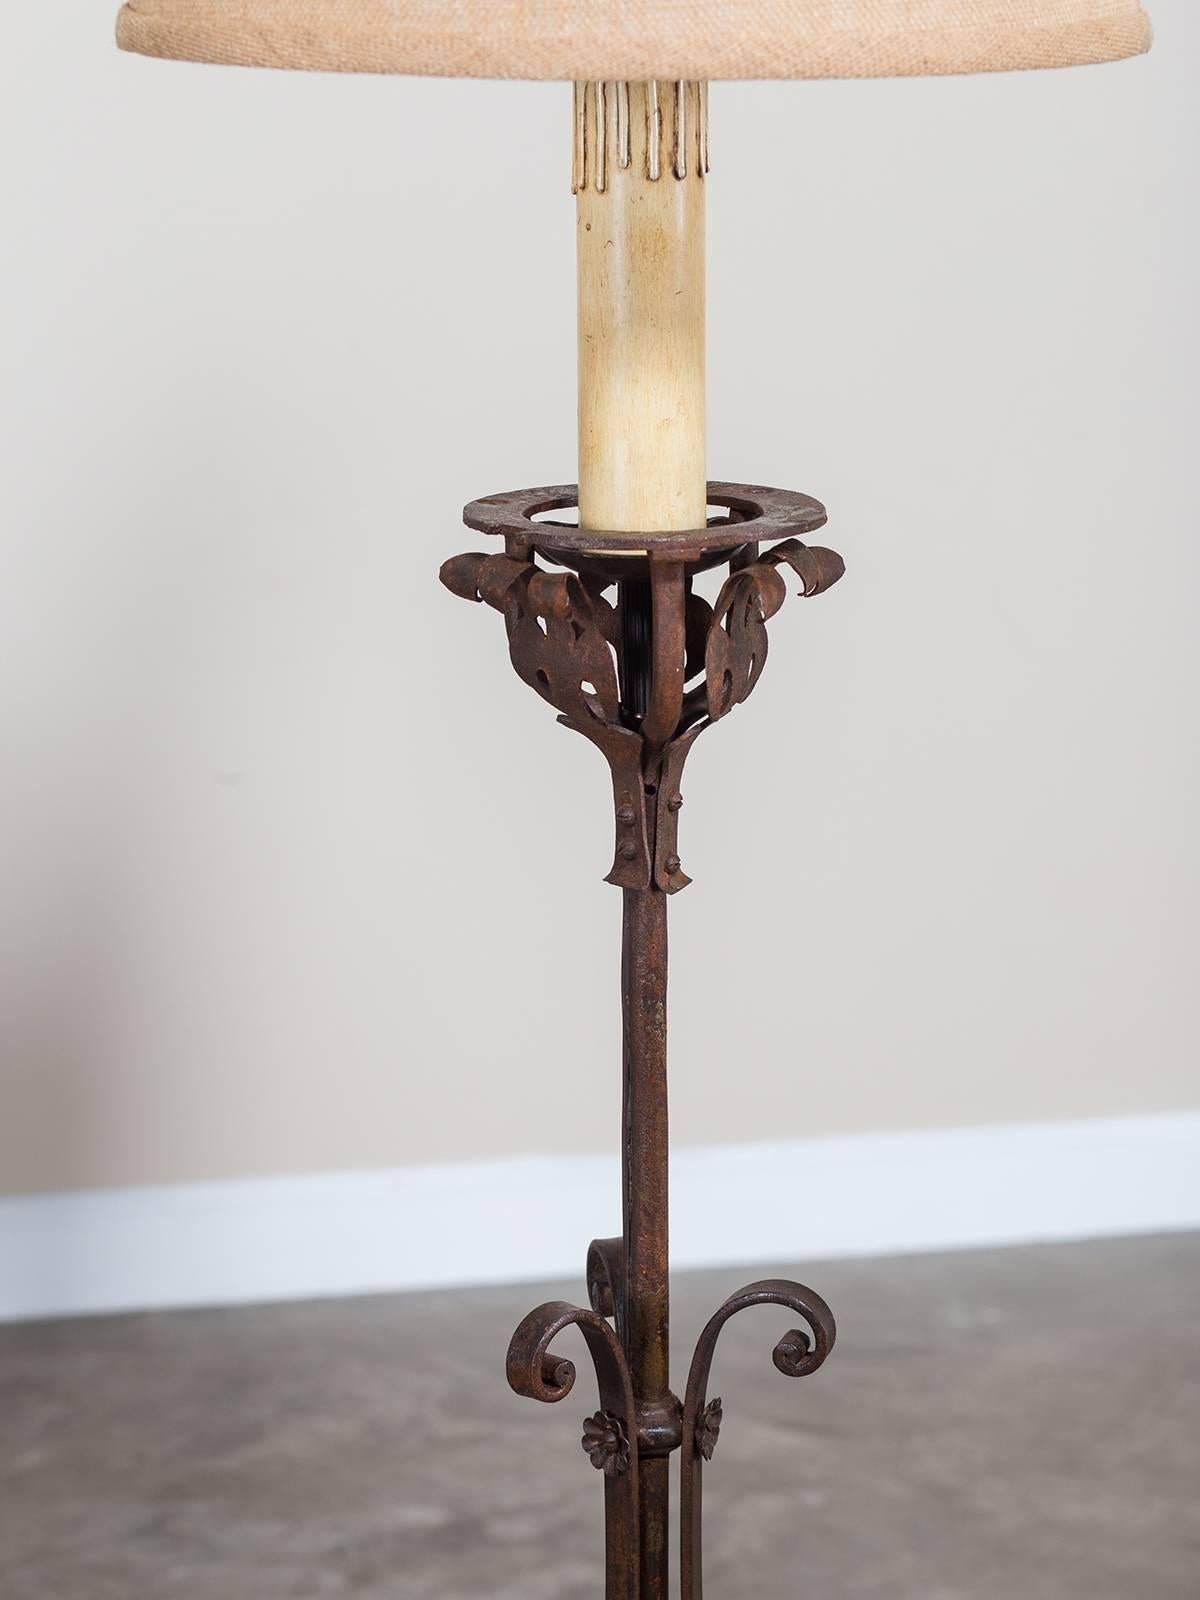 Antique French Forged Iron Candle Stand Floor Lamp, circa 1900 In Excellent Condition For Sale In Houston, TX